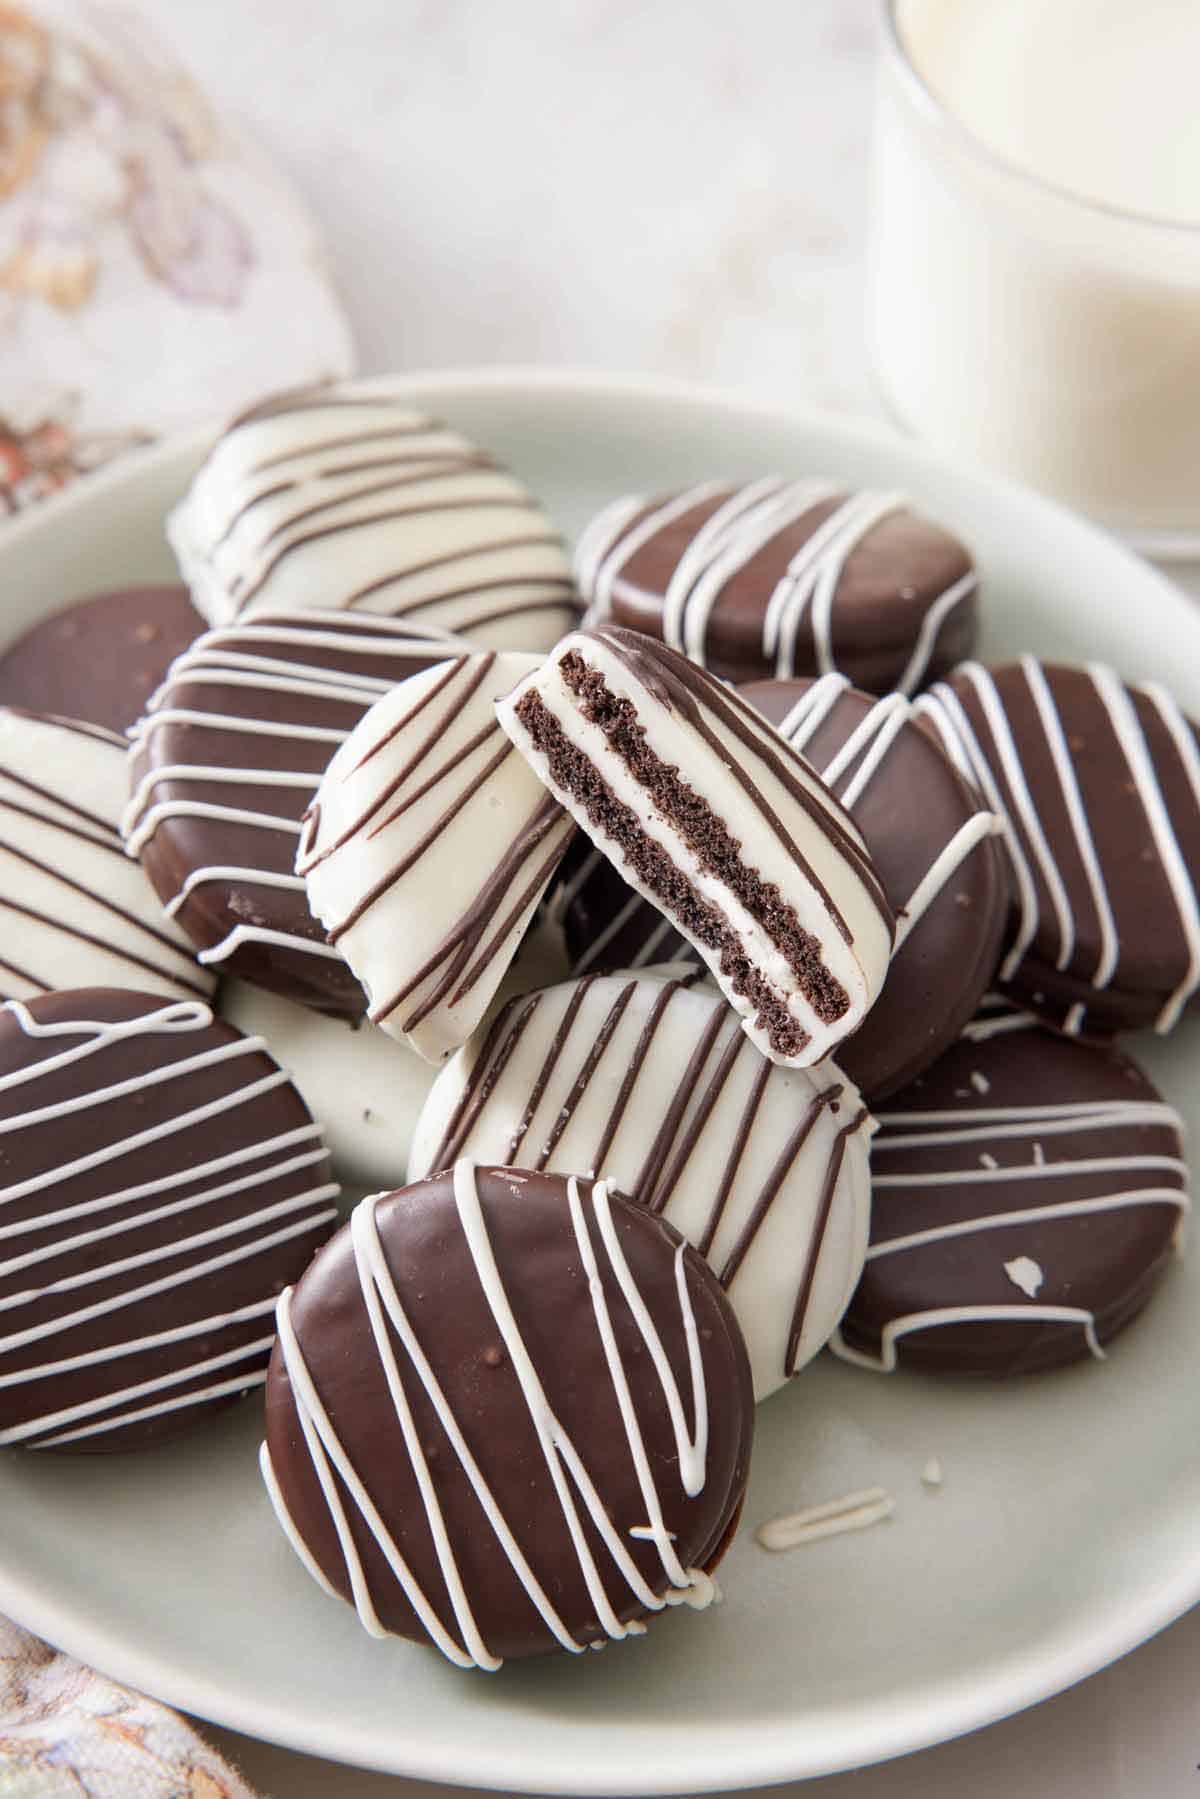 A platter of chocolate covered oreos with one cut in half showing the interior.